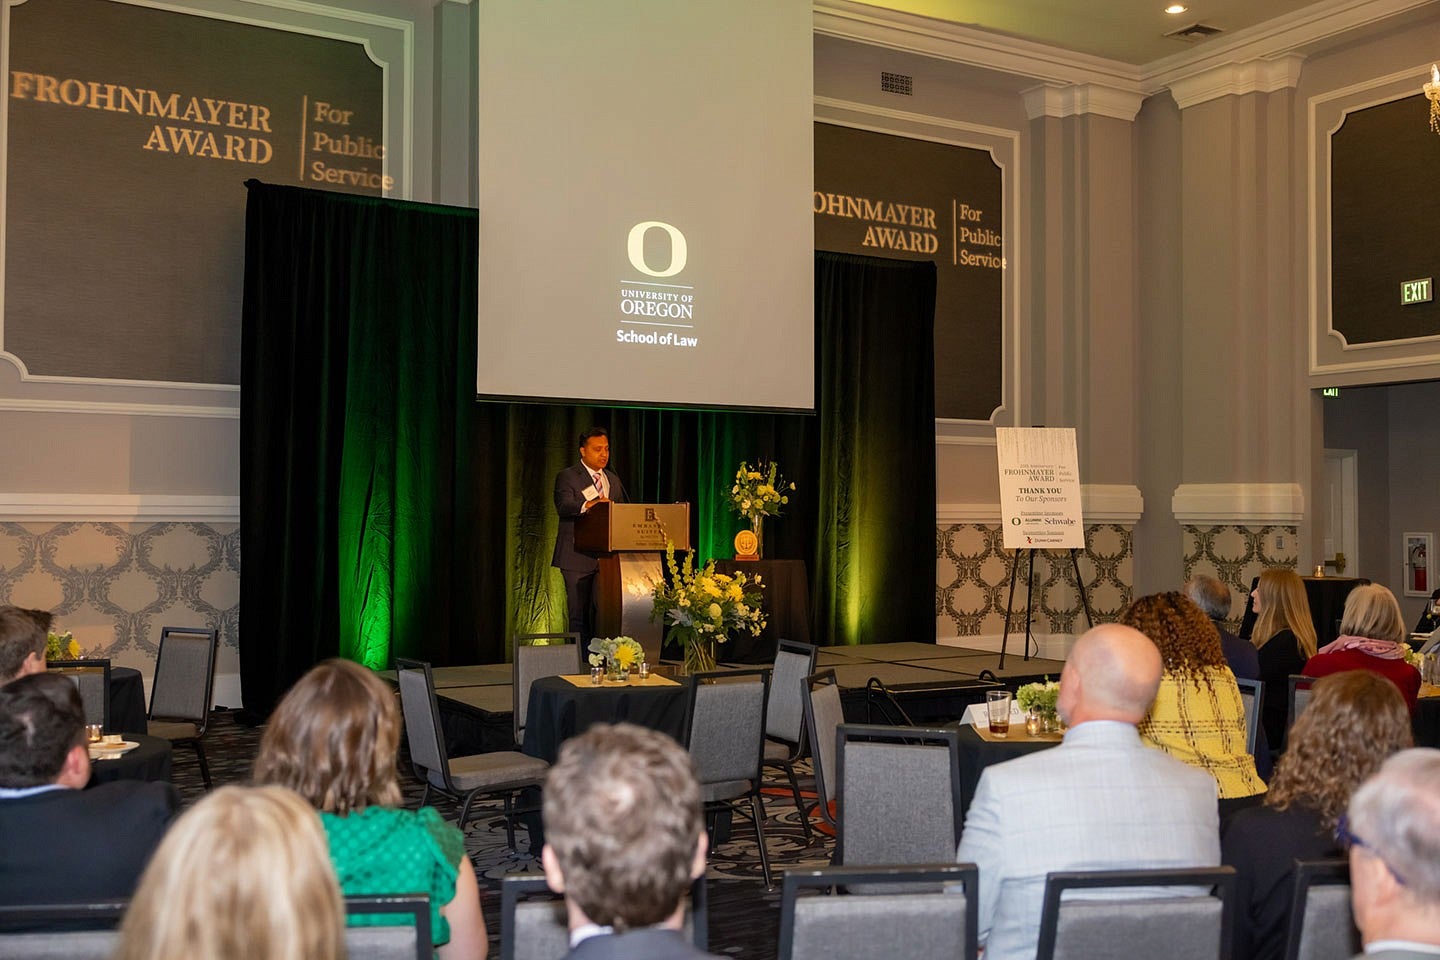 Abid Hussain speaking at a podium on stage before an audience with a green curtain and a projection screen behind him that reads "University of Oregon School of Law" below the yellow O logo at the Frohnmayer Awards.